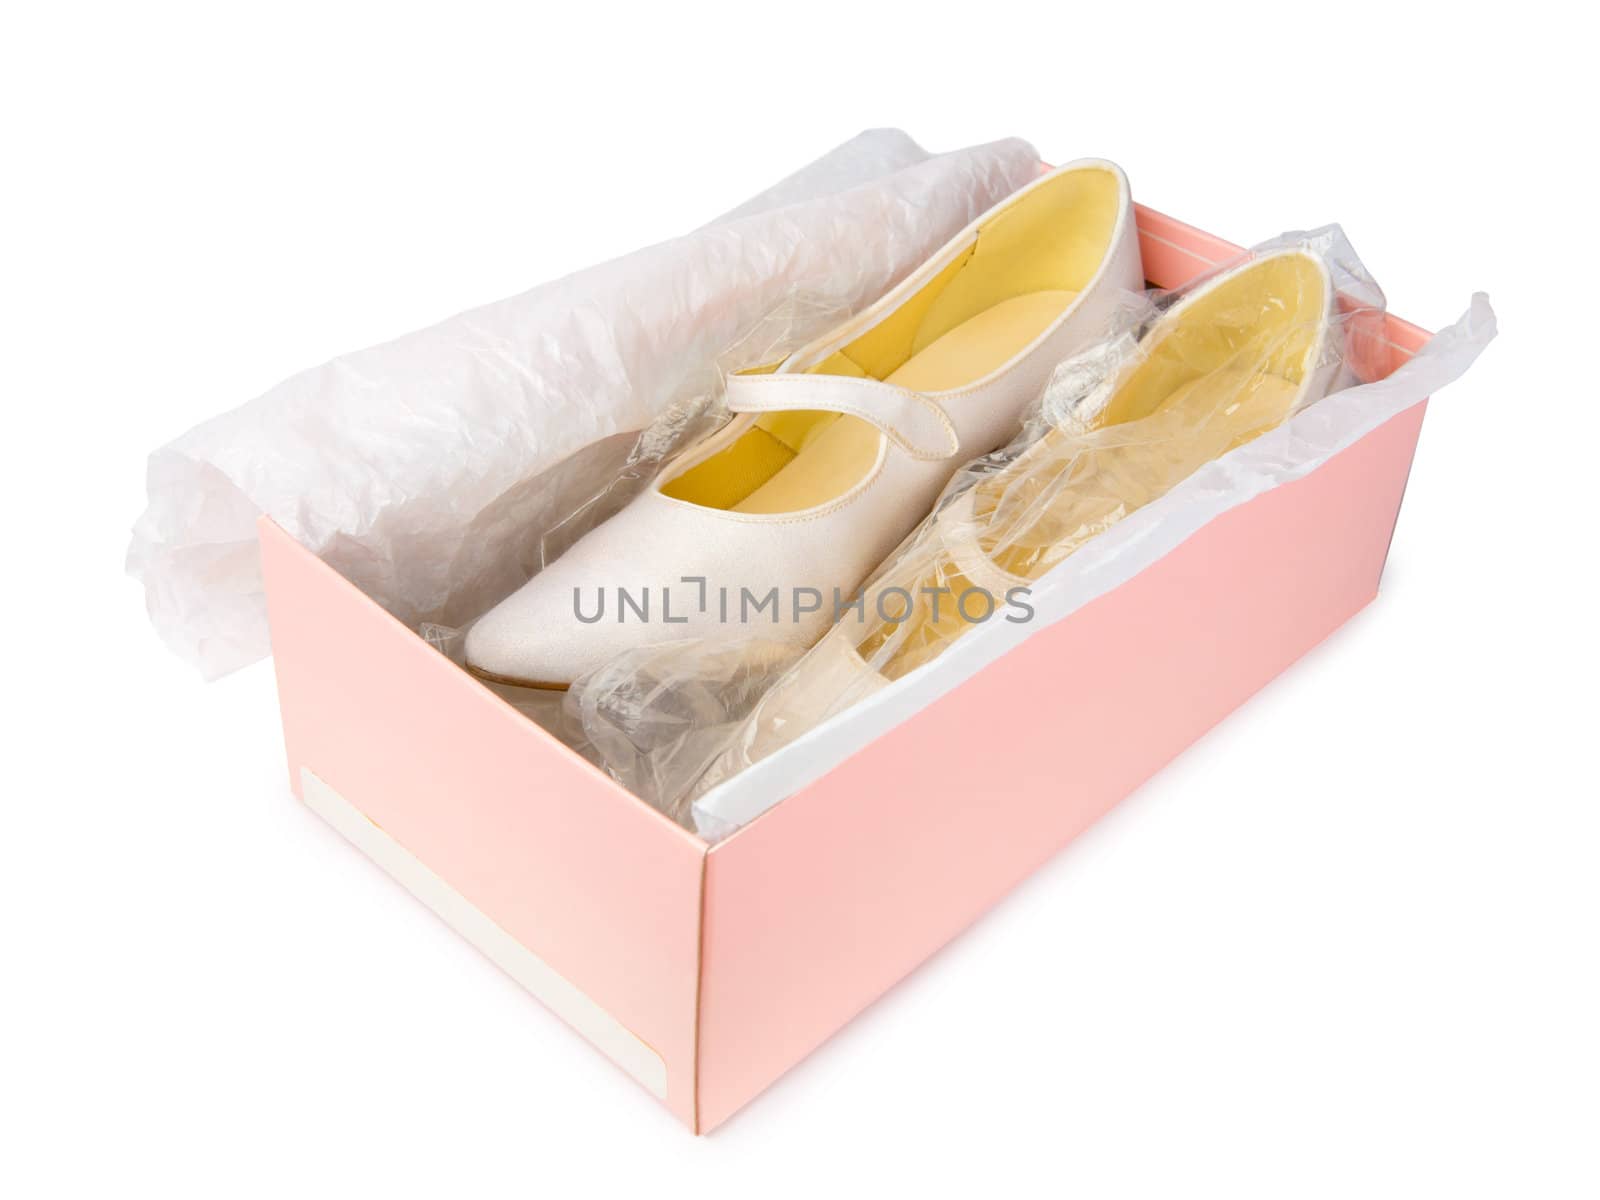 Shoes in shoe box by Luminis